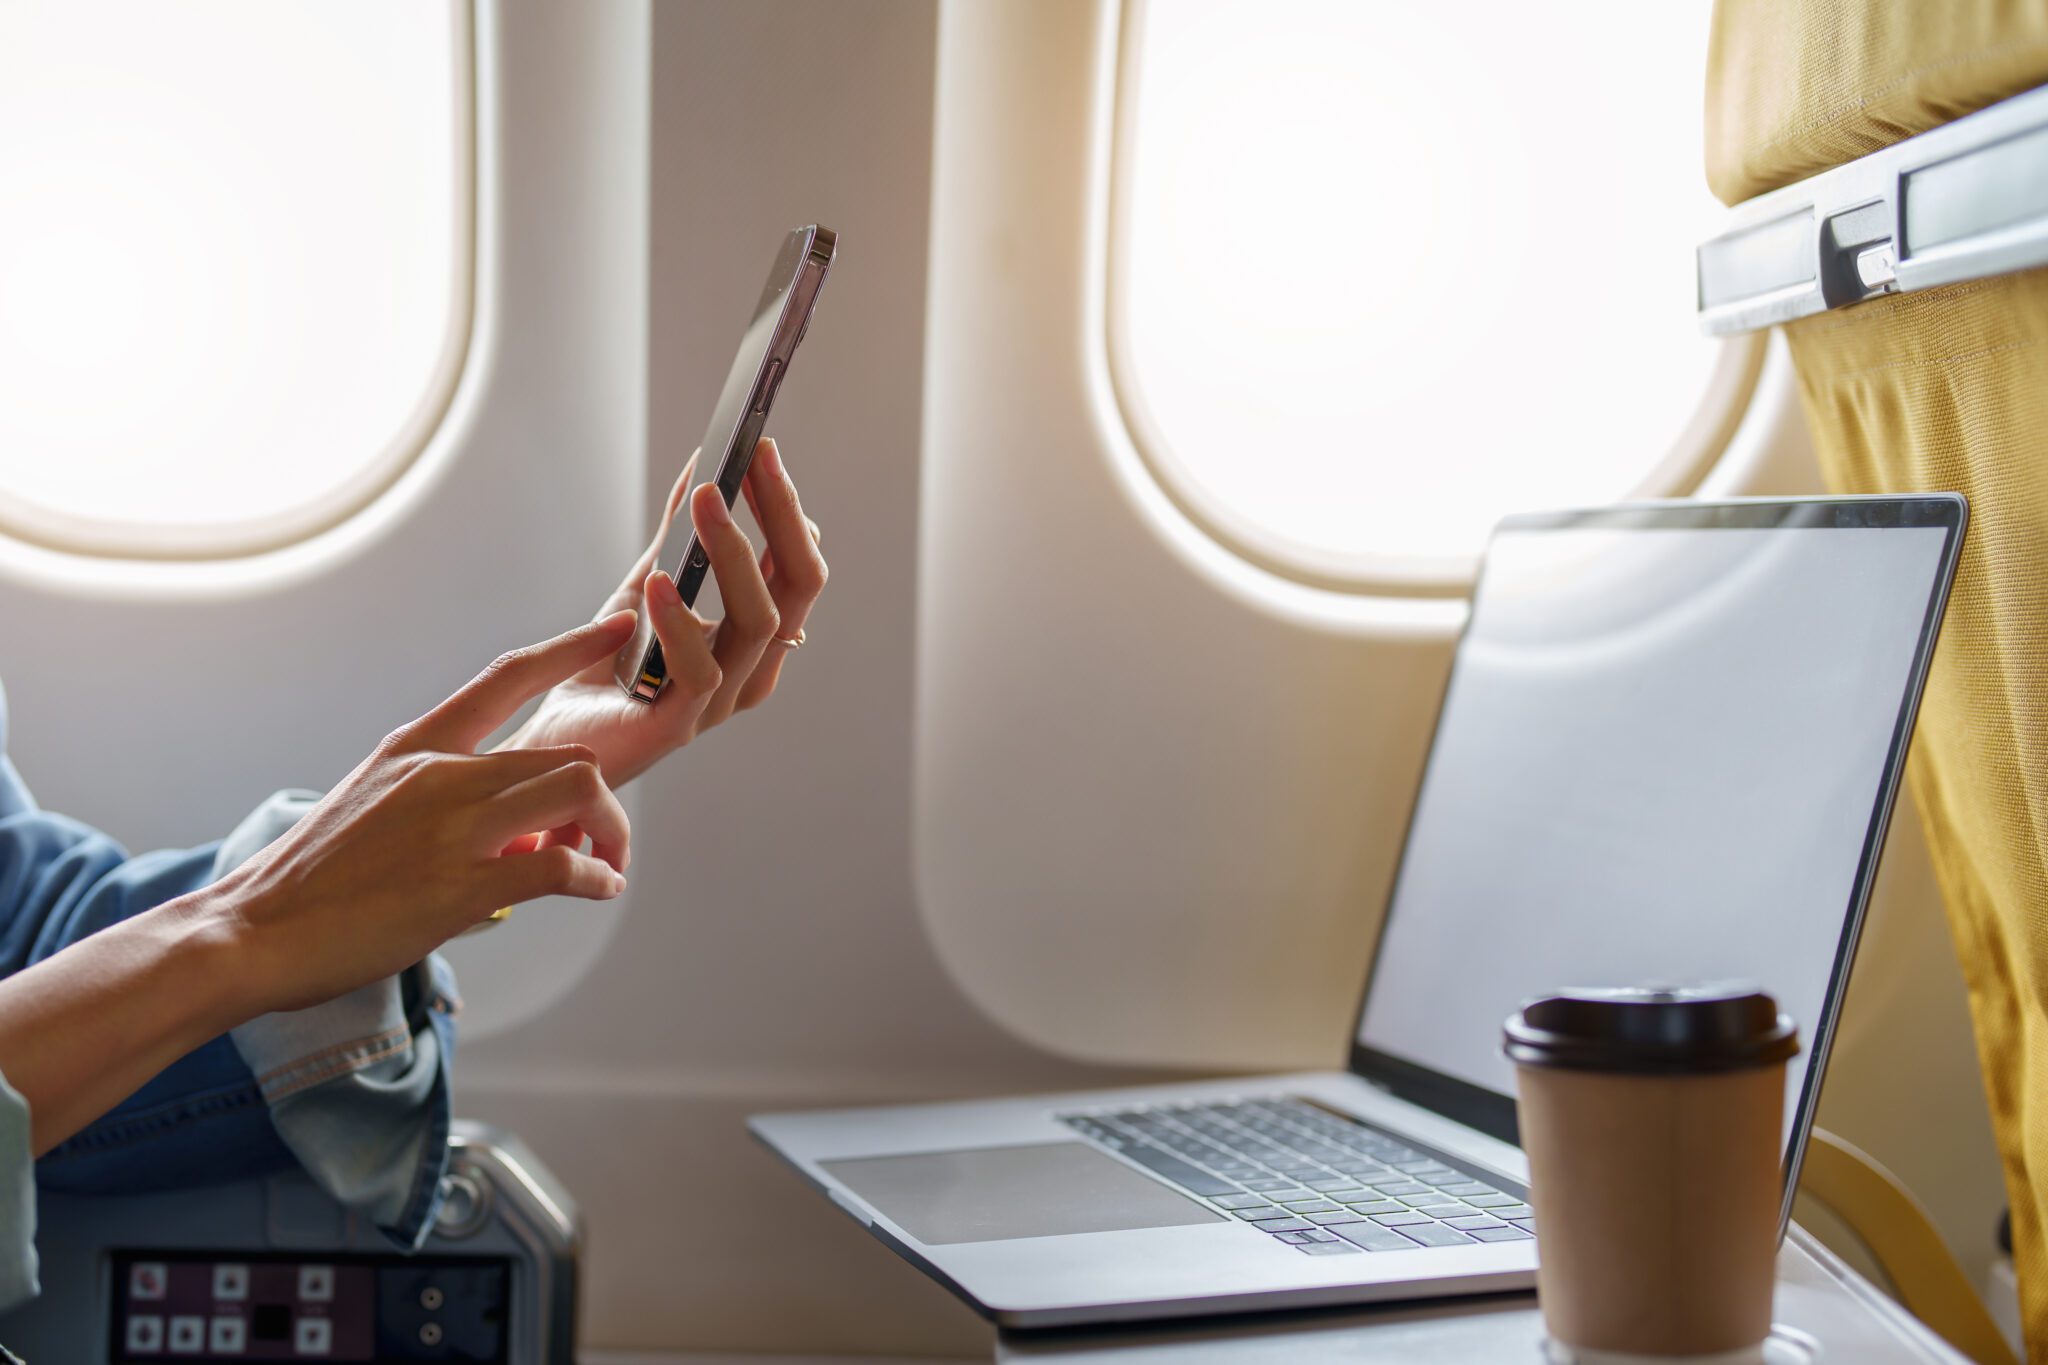 Travelers might be able to benefit from faster Internet connections while flying.